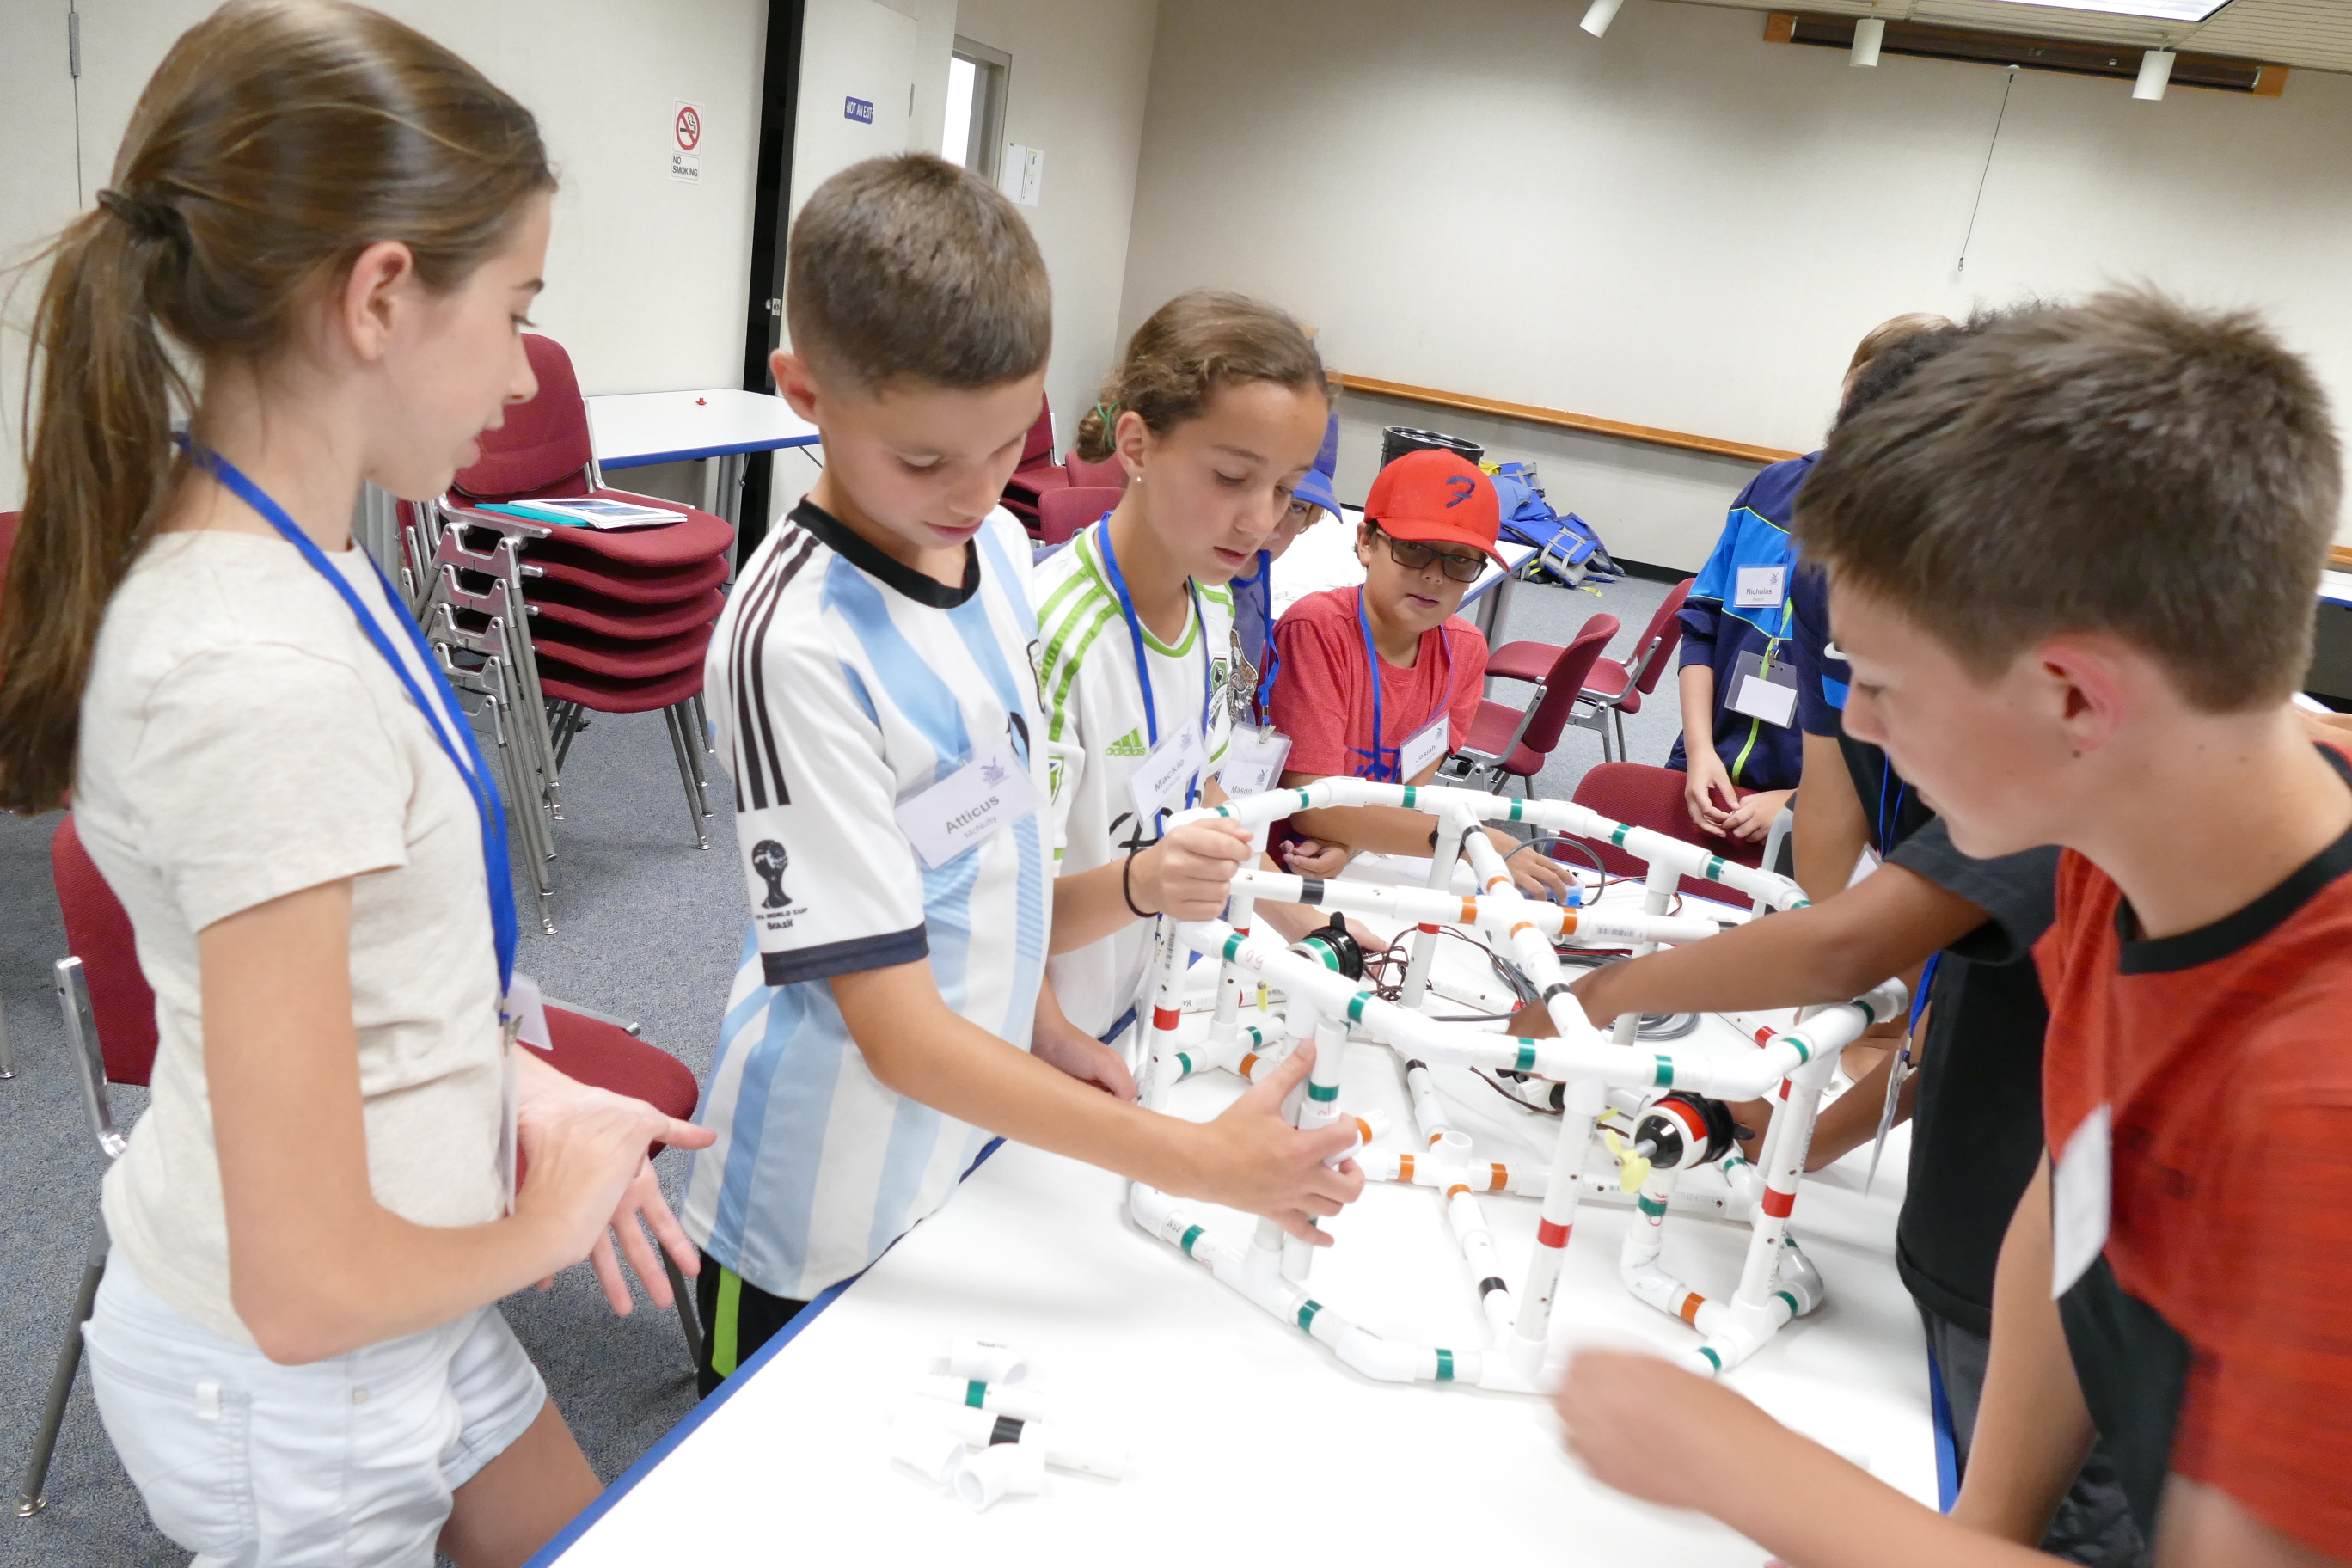 Middle schoolers at NOAA Science Camp in Seattle Washington explore design considerations while creating a PVC Remotely Operated Vehicle. The three day ROV Mini-Session at Science Camp inspires students to explore STEM fields through hands-on learning, and introduces middle schoolers to scientists who use remotely operated data collection devices in their research.